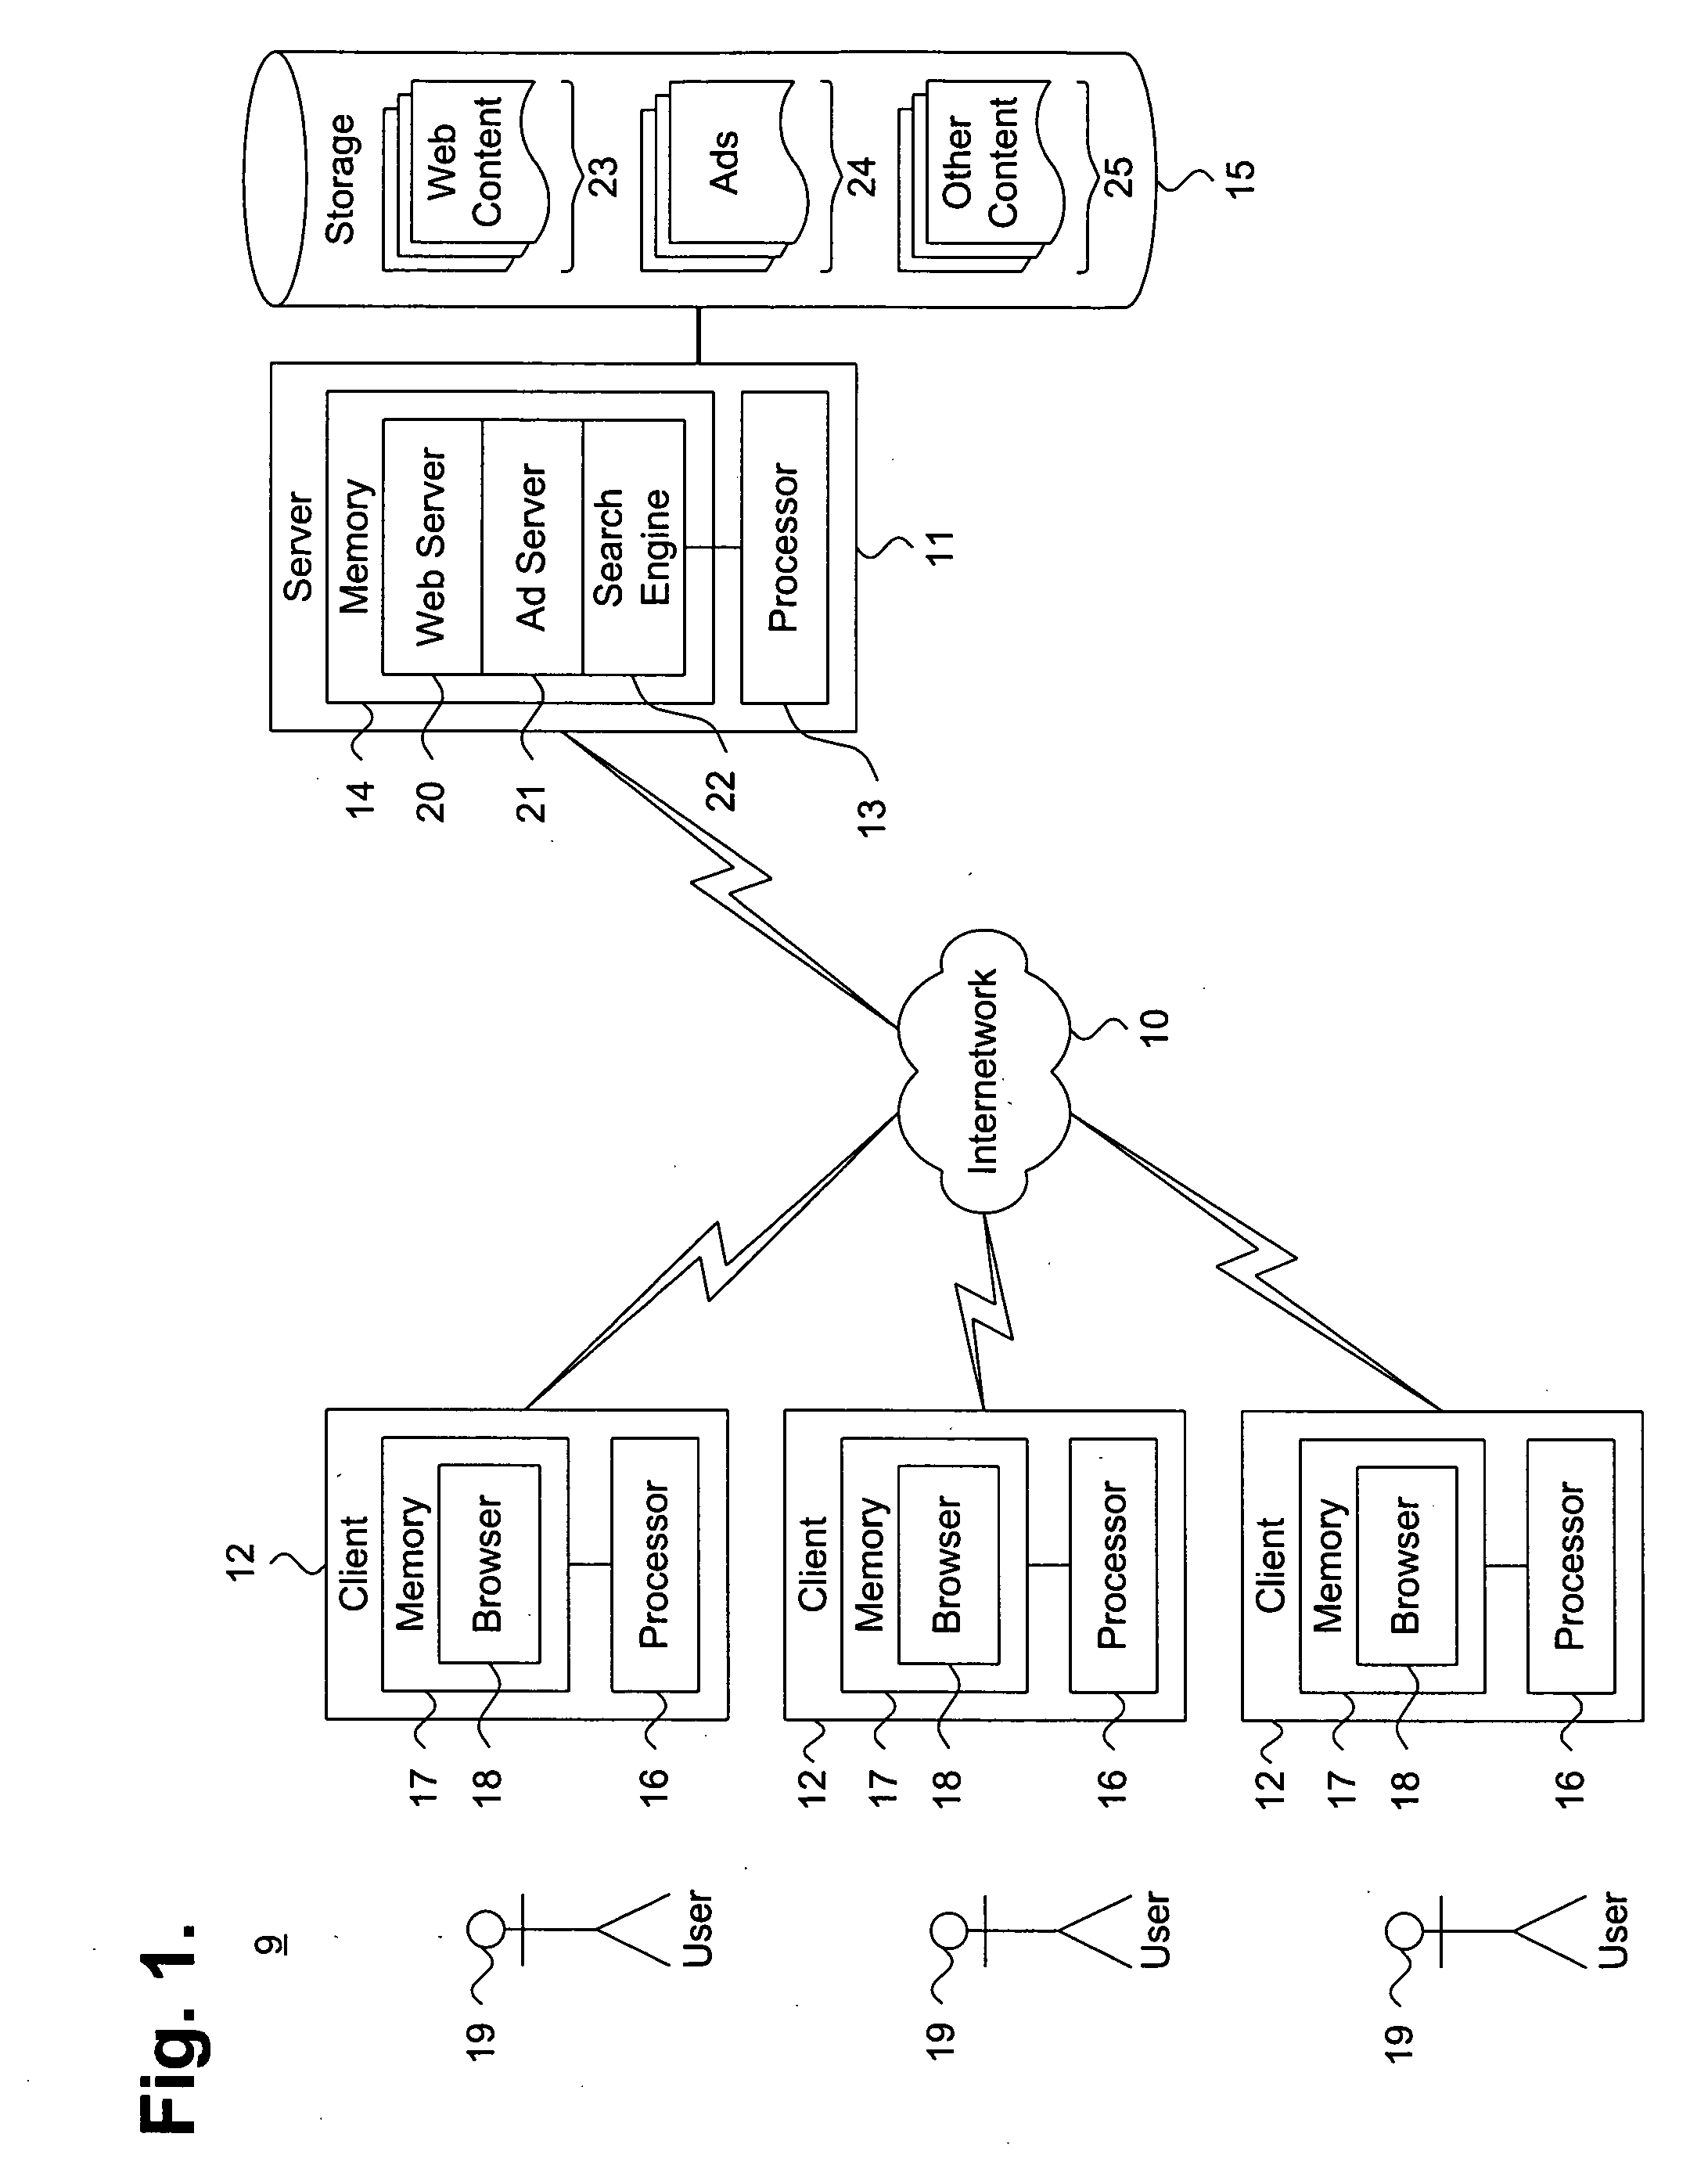 System and method for providing on-line user-assisted Web-based advertising